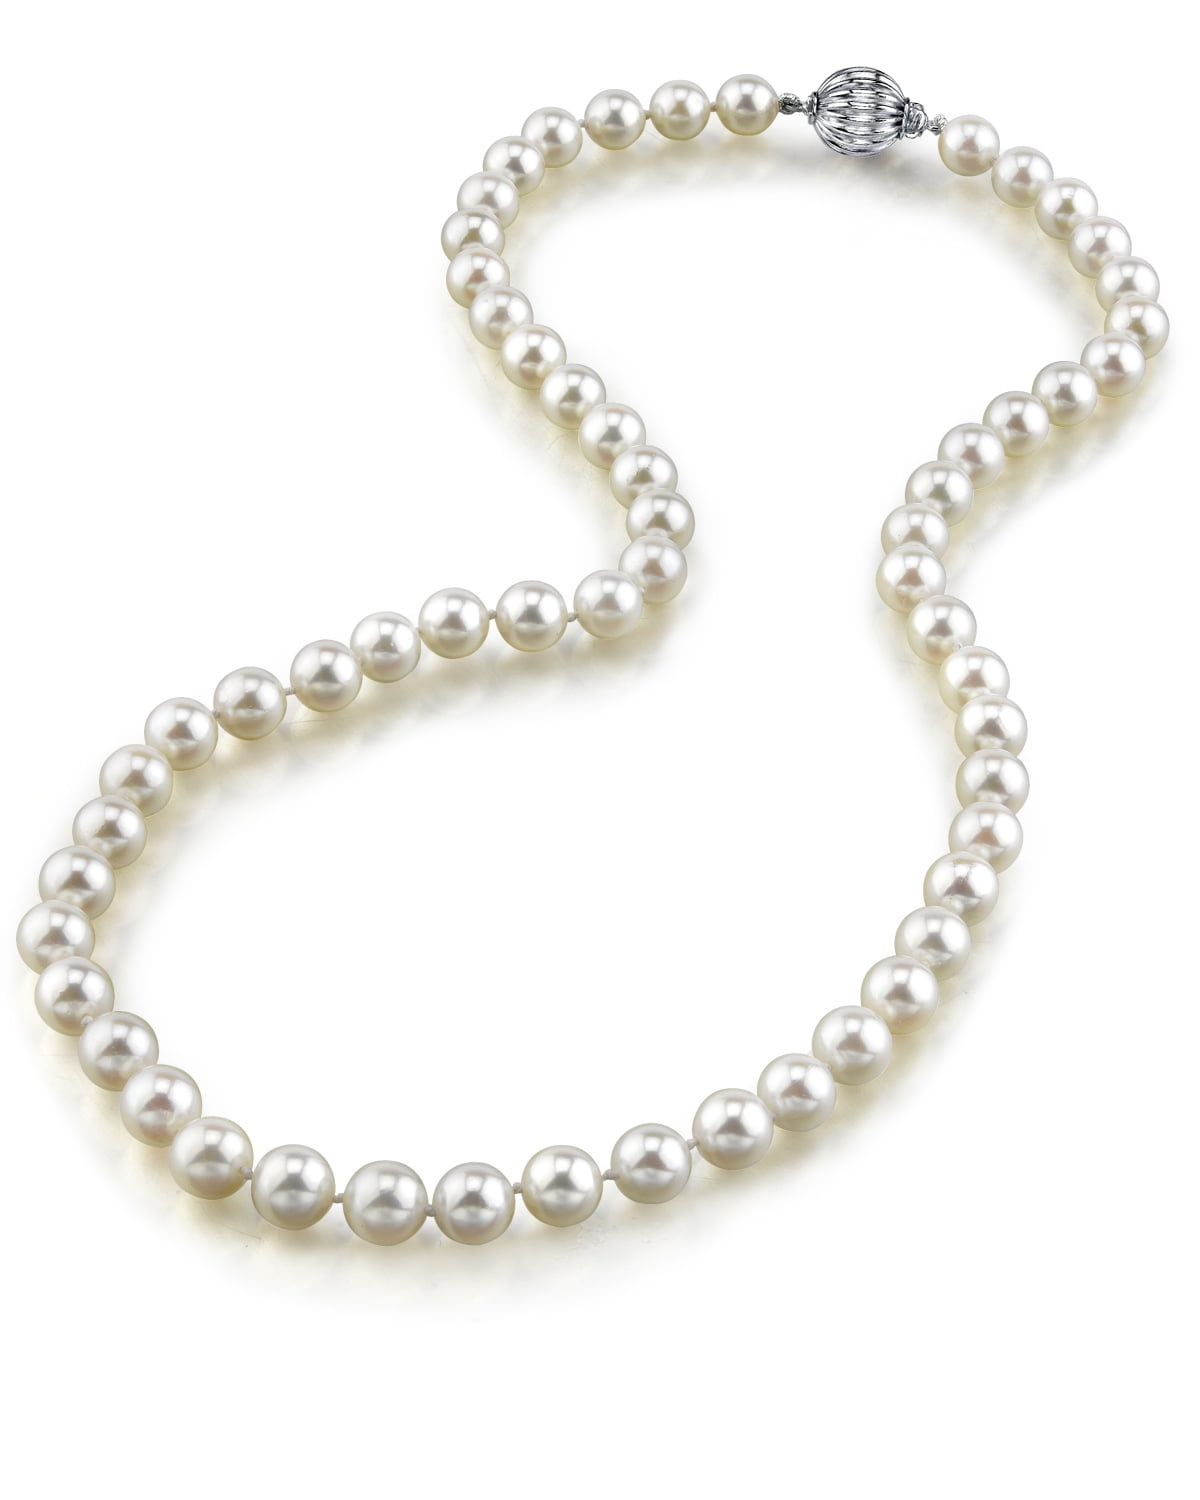 THE PEARL SOURCE 14K Gold 8-9mm AAA Quality White Freshwater Cultured Pearl Necklace for Women in 36 Opera Length